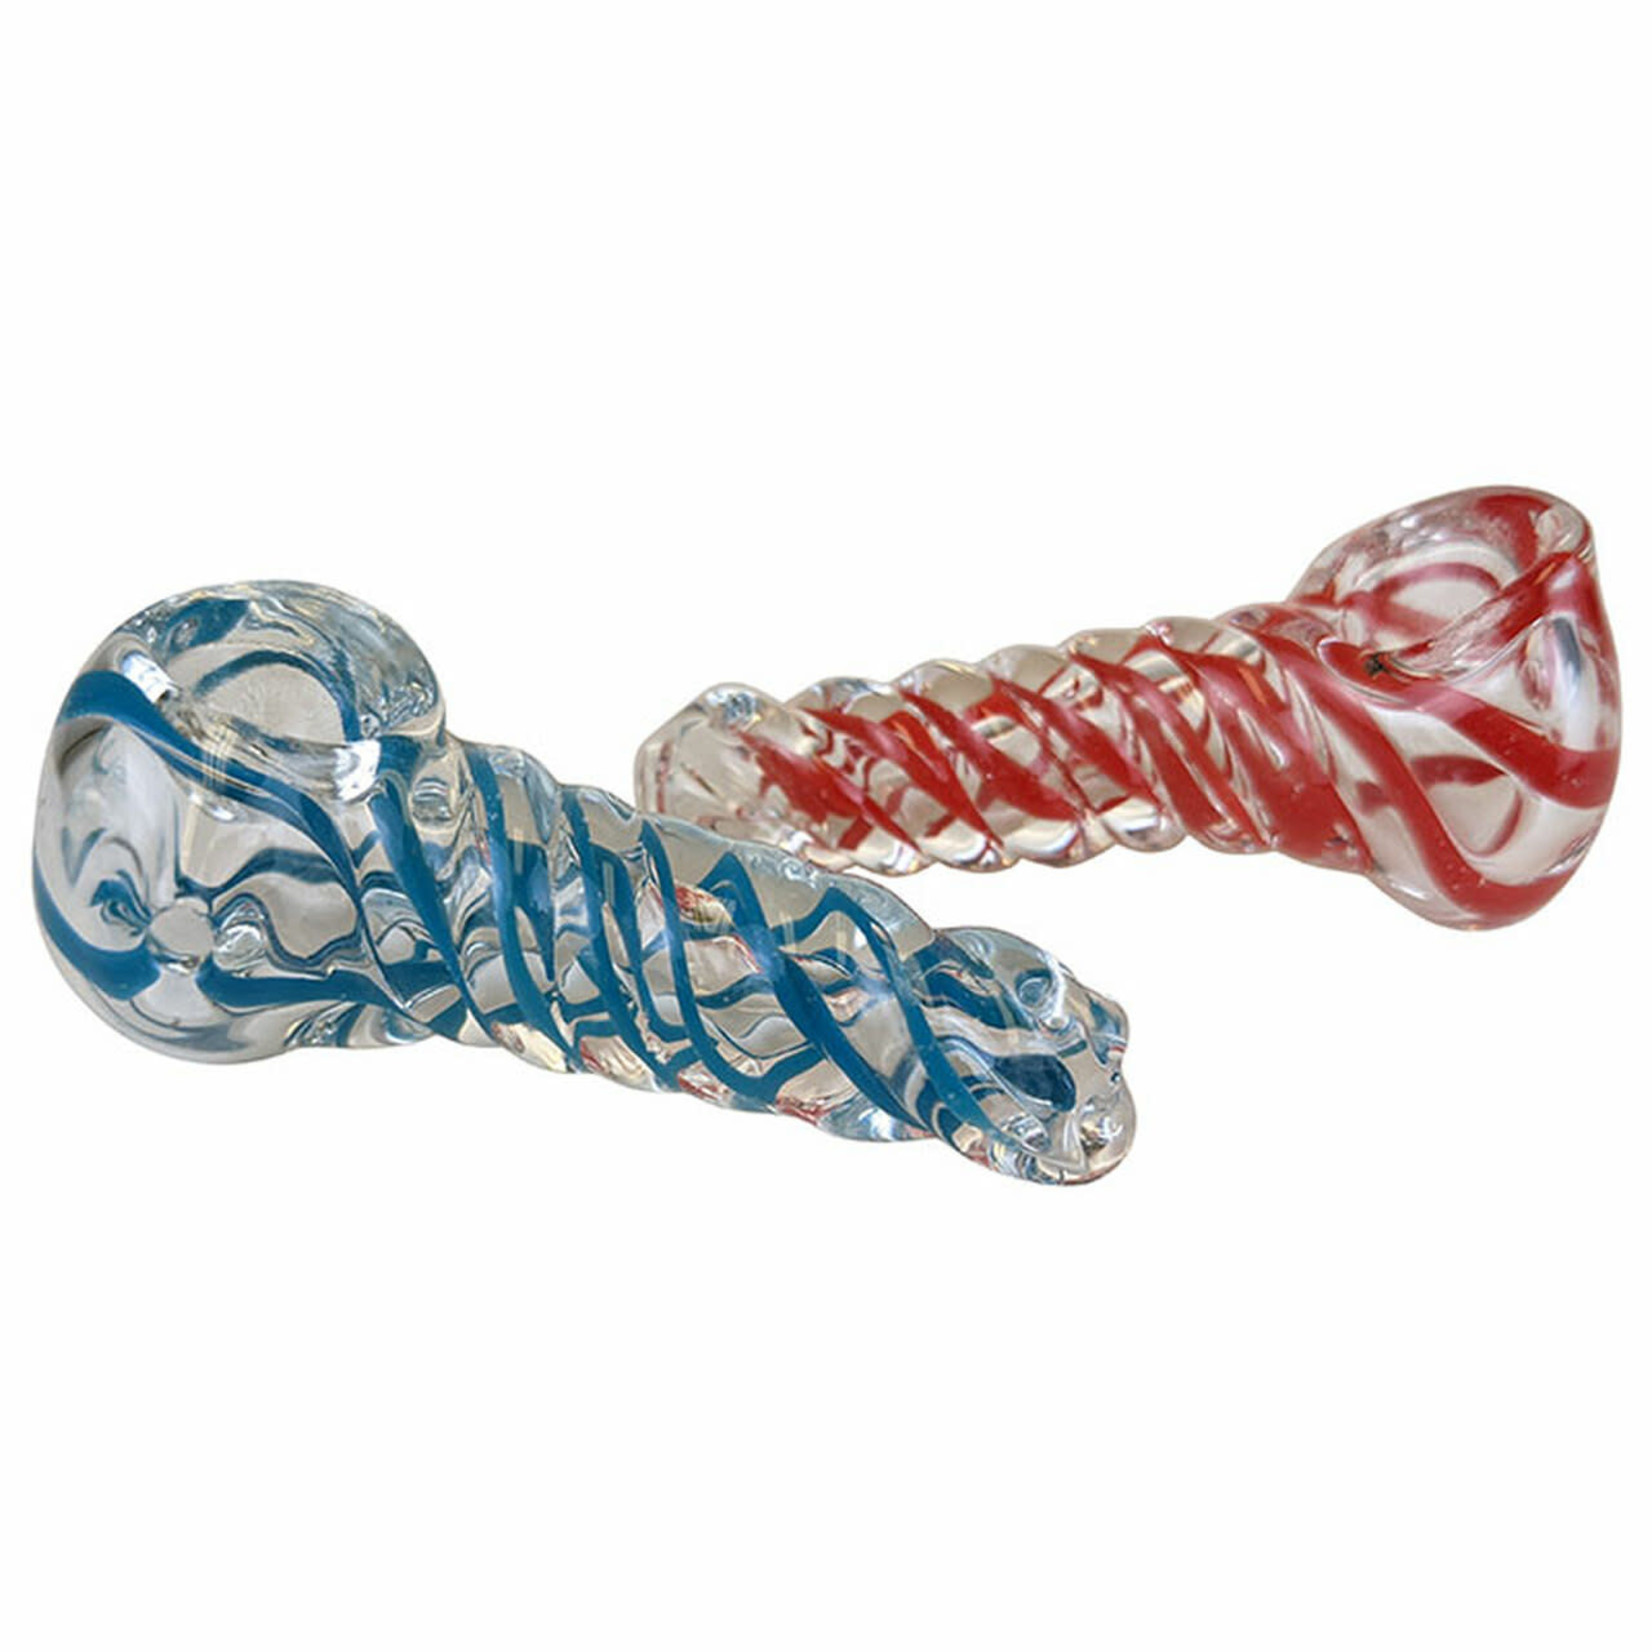 2.5” Twisted Outer Grip Spoon - Hand Pipe